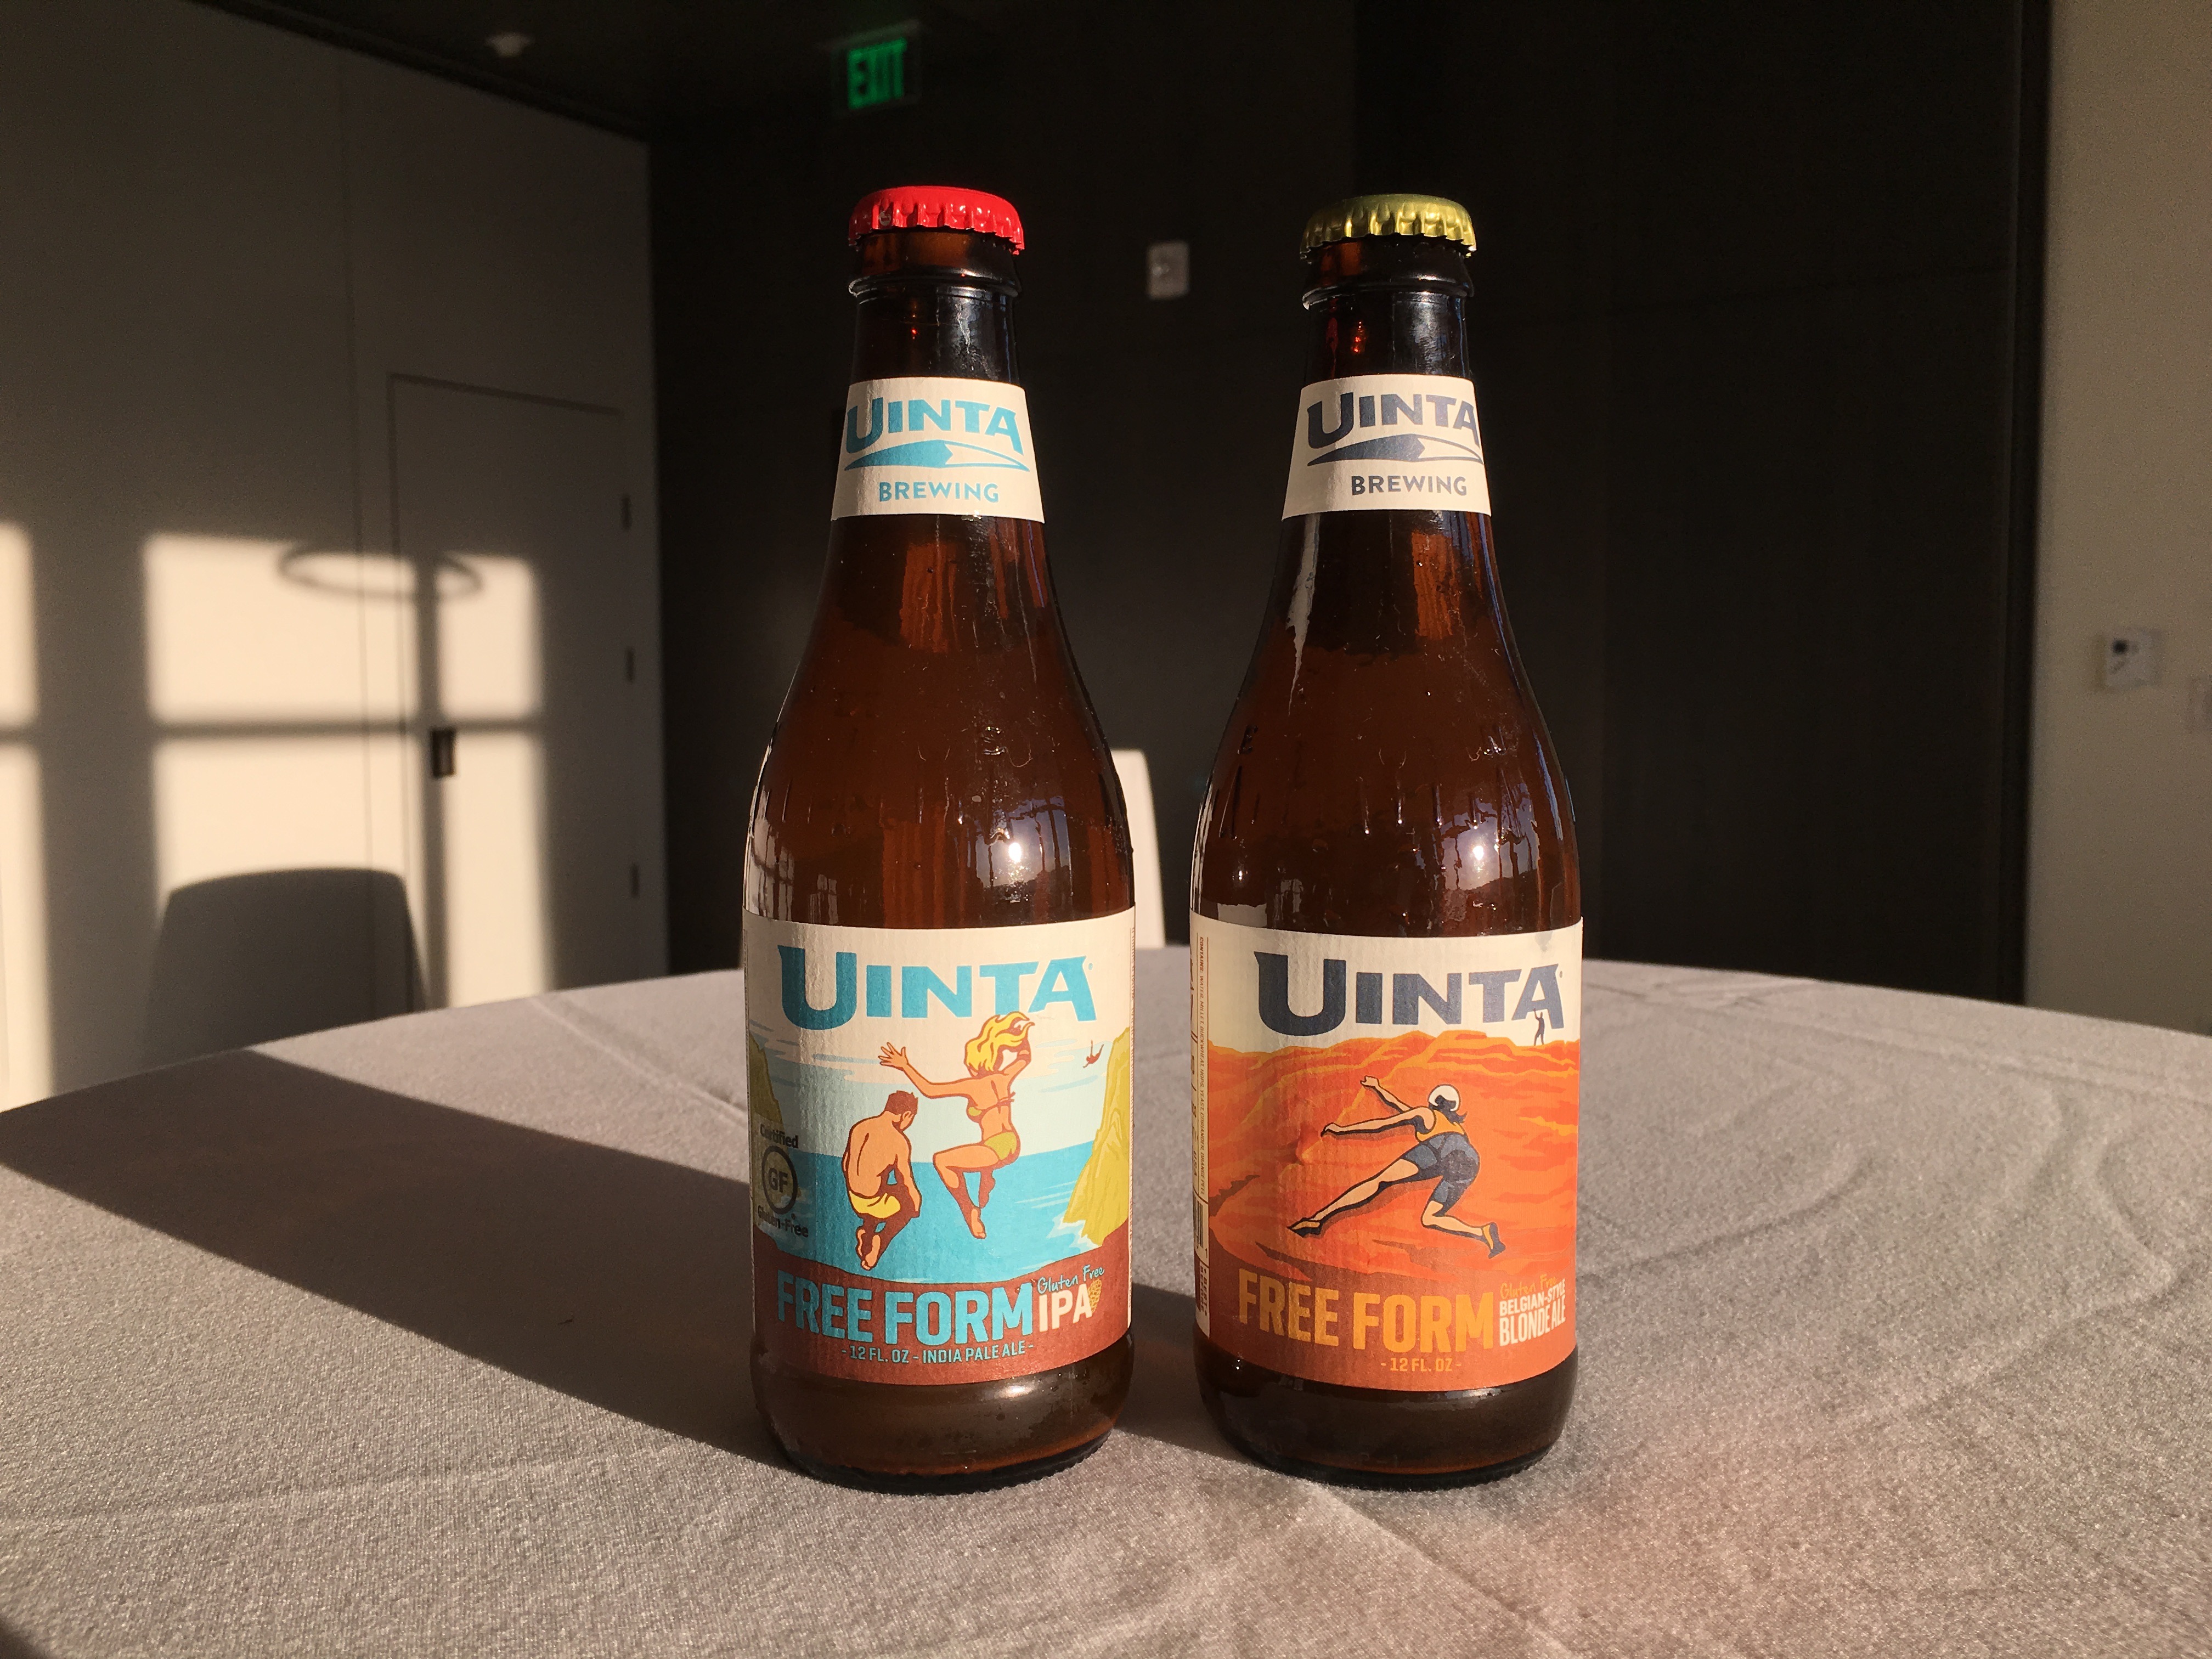 Bottles of Uinta Brewing Free Form Gluten Free IPA and Belgian-Style Blonde Ale.